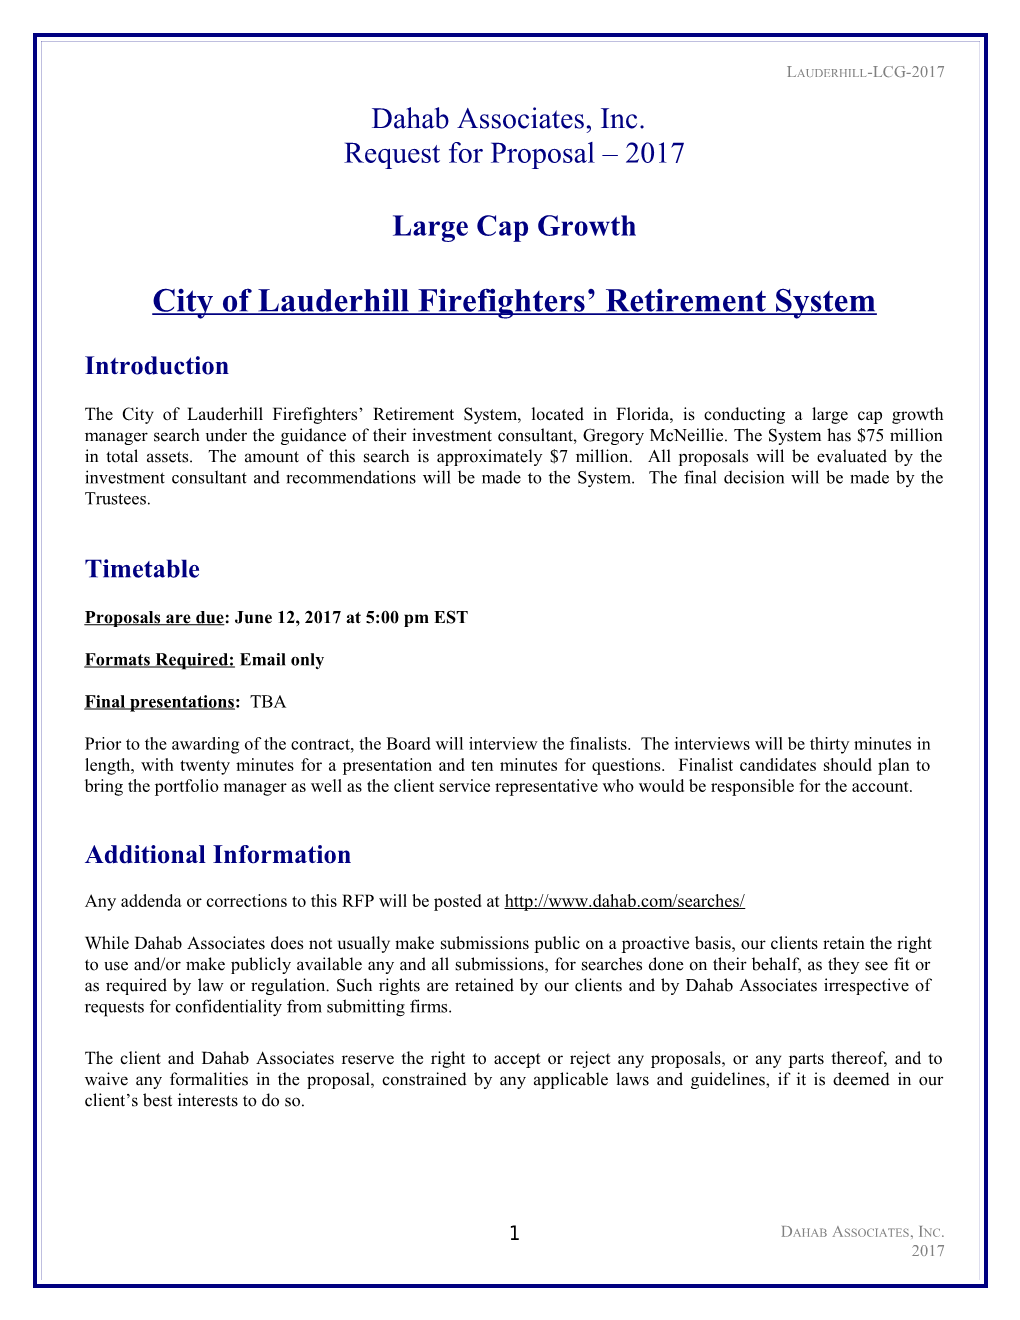 City of Lauderhill Firefighters Retirement System